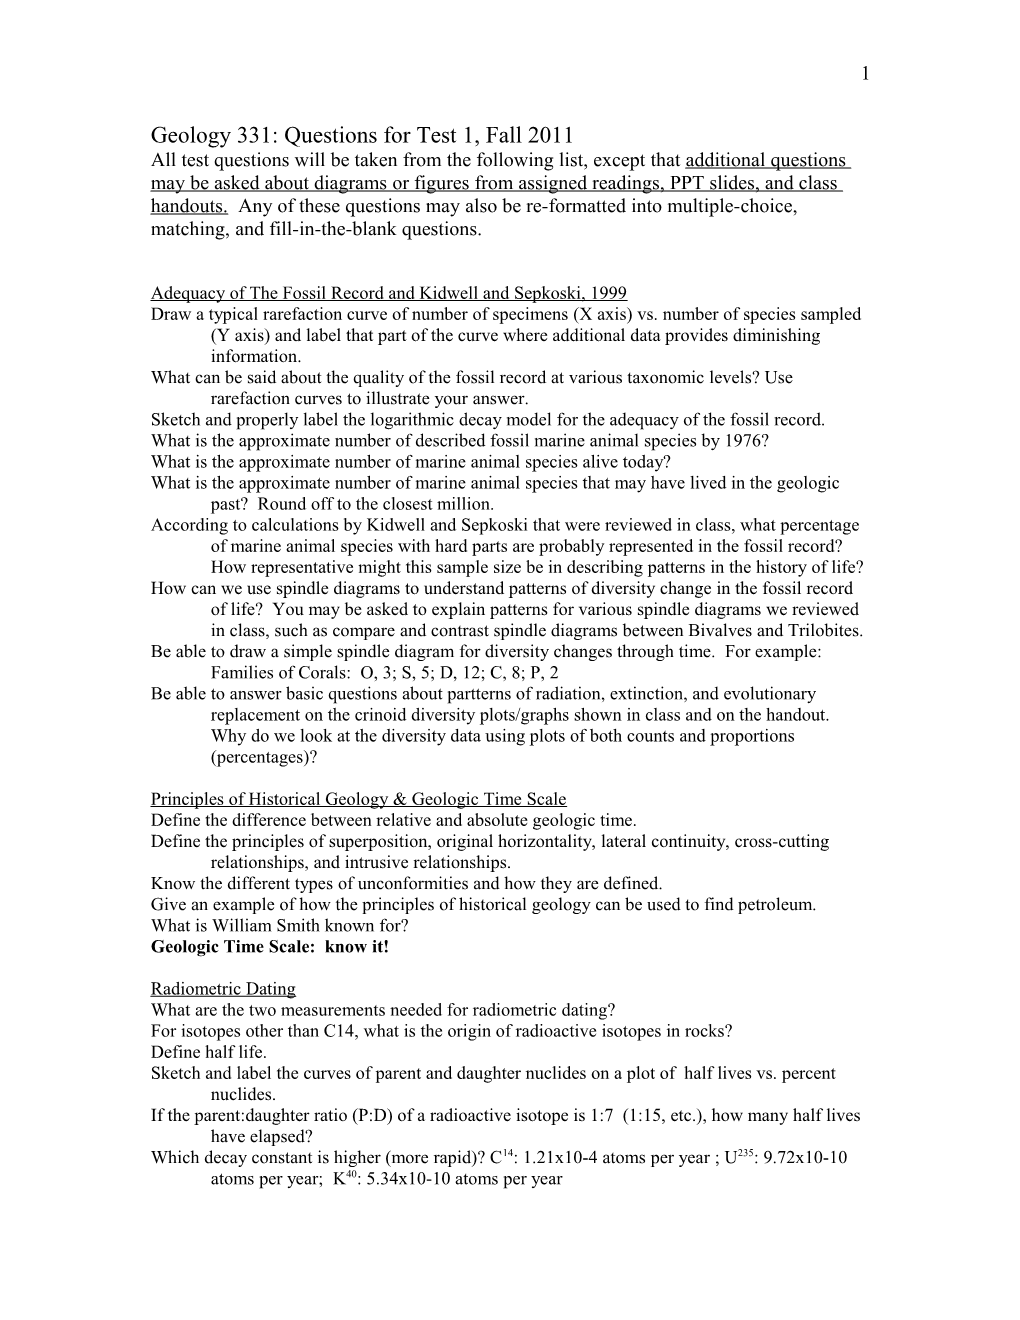 Questions for Test 1 (Practice and Actual Tests), Fall 2001